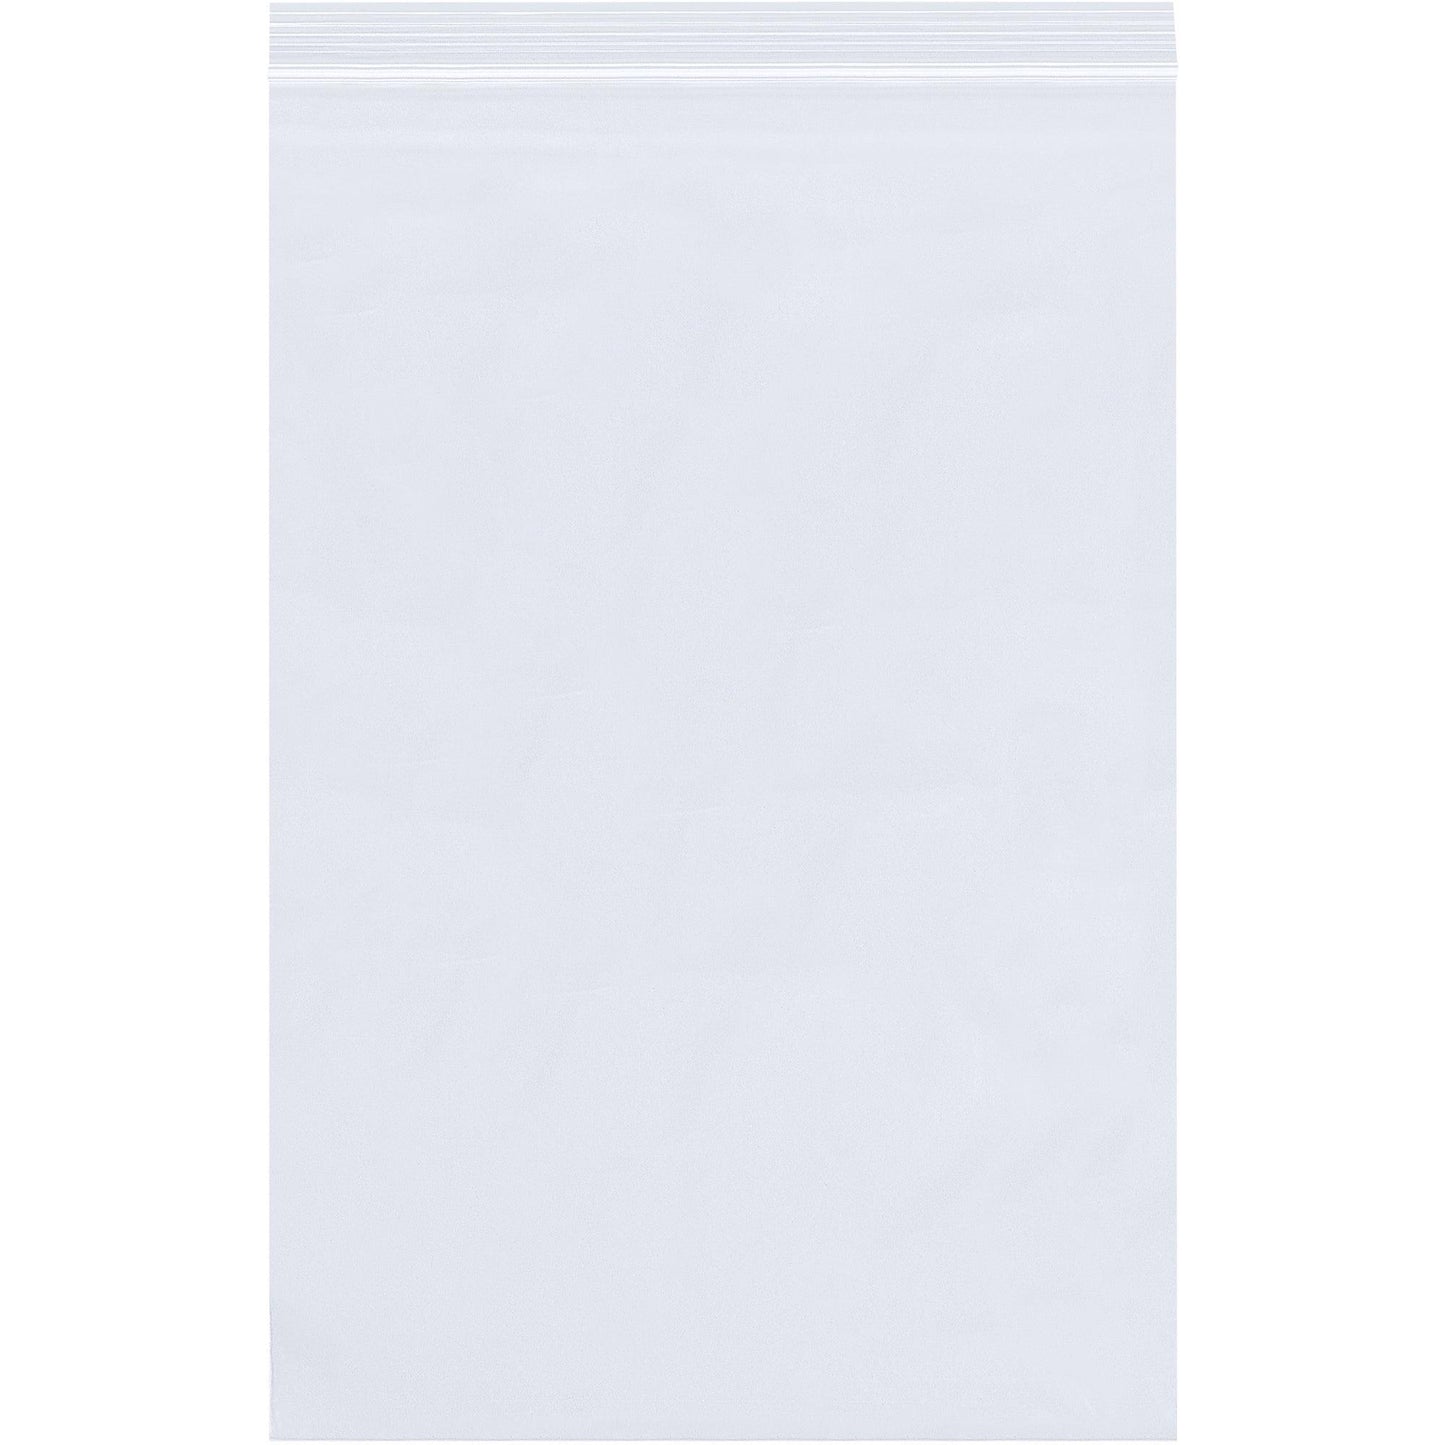 9 x 9" - 4 Mil Reclosable Poly Bags - PB3728